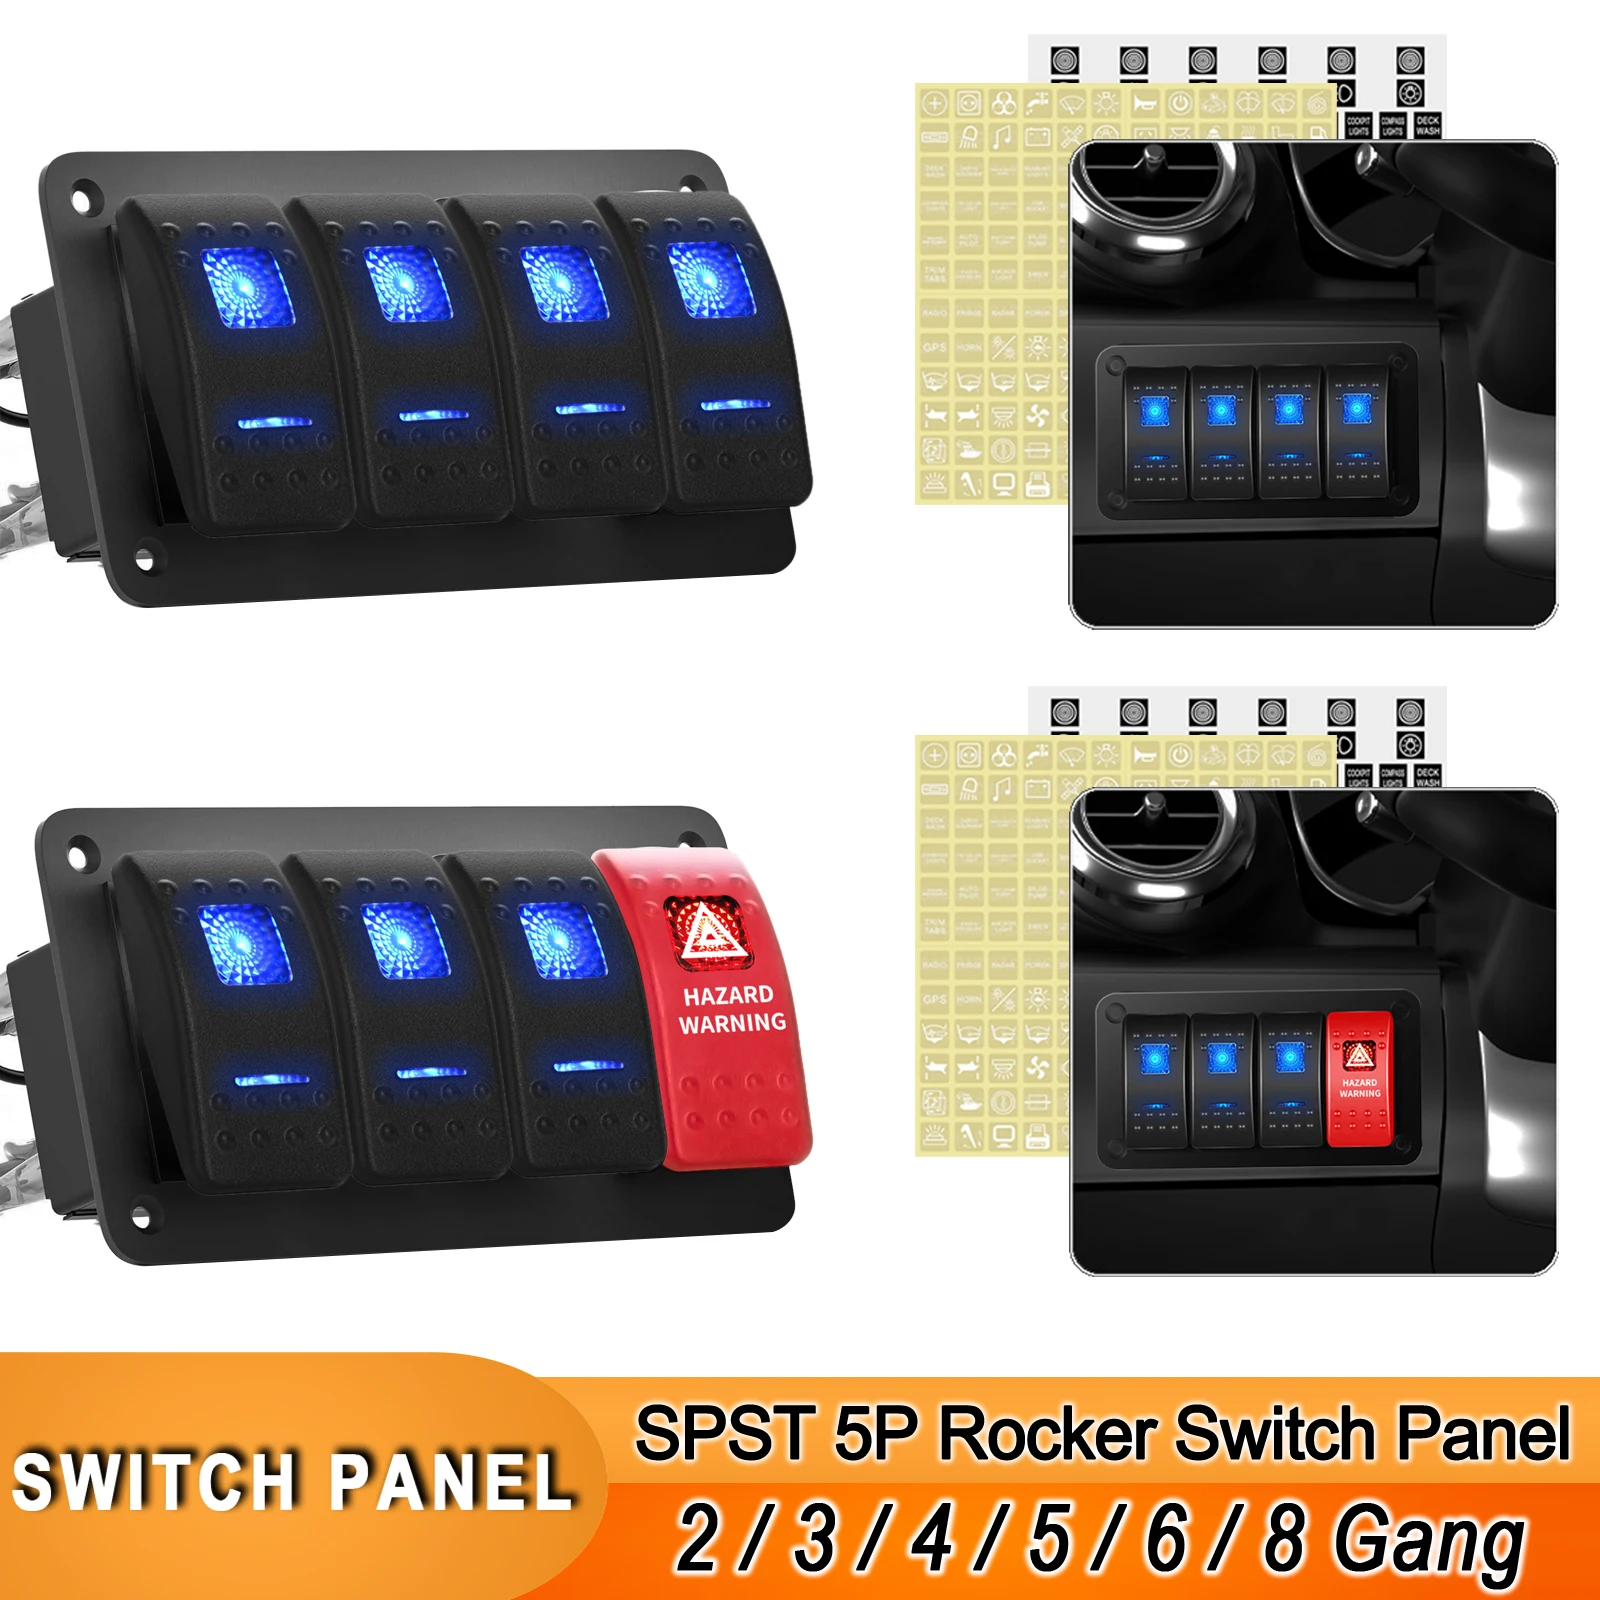 

2 3 4 5 6 8 Gang Marine Blue Led Rocker Switch Panel 5P ON/OFF Aluminum Switch Panel with Red Hazard For Car Marine Boat Truck